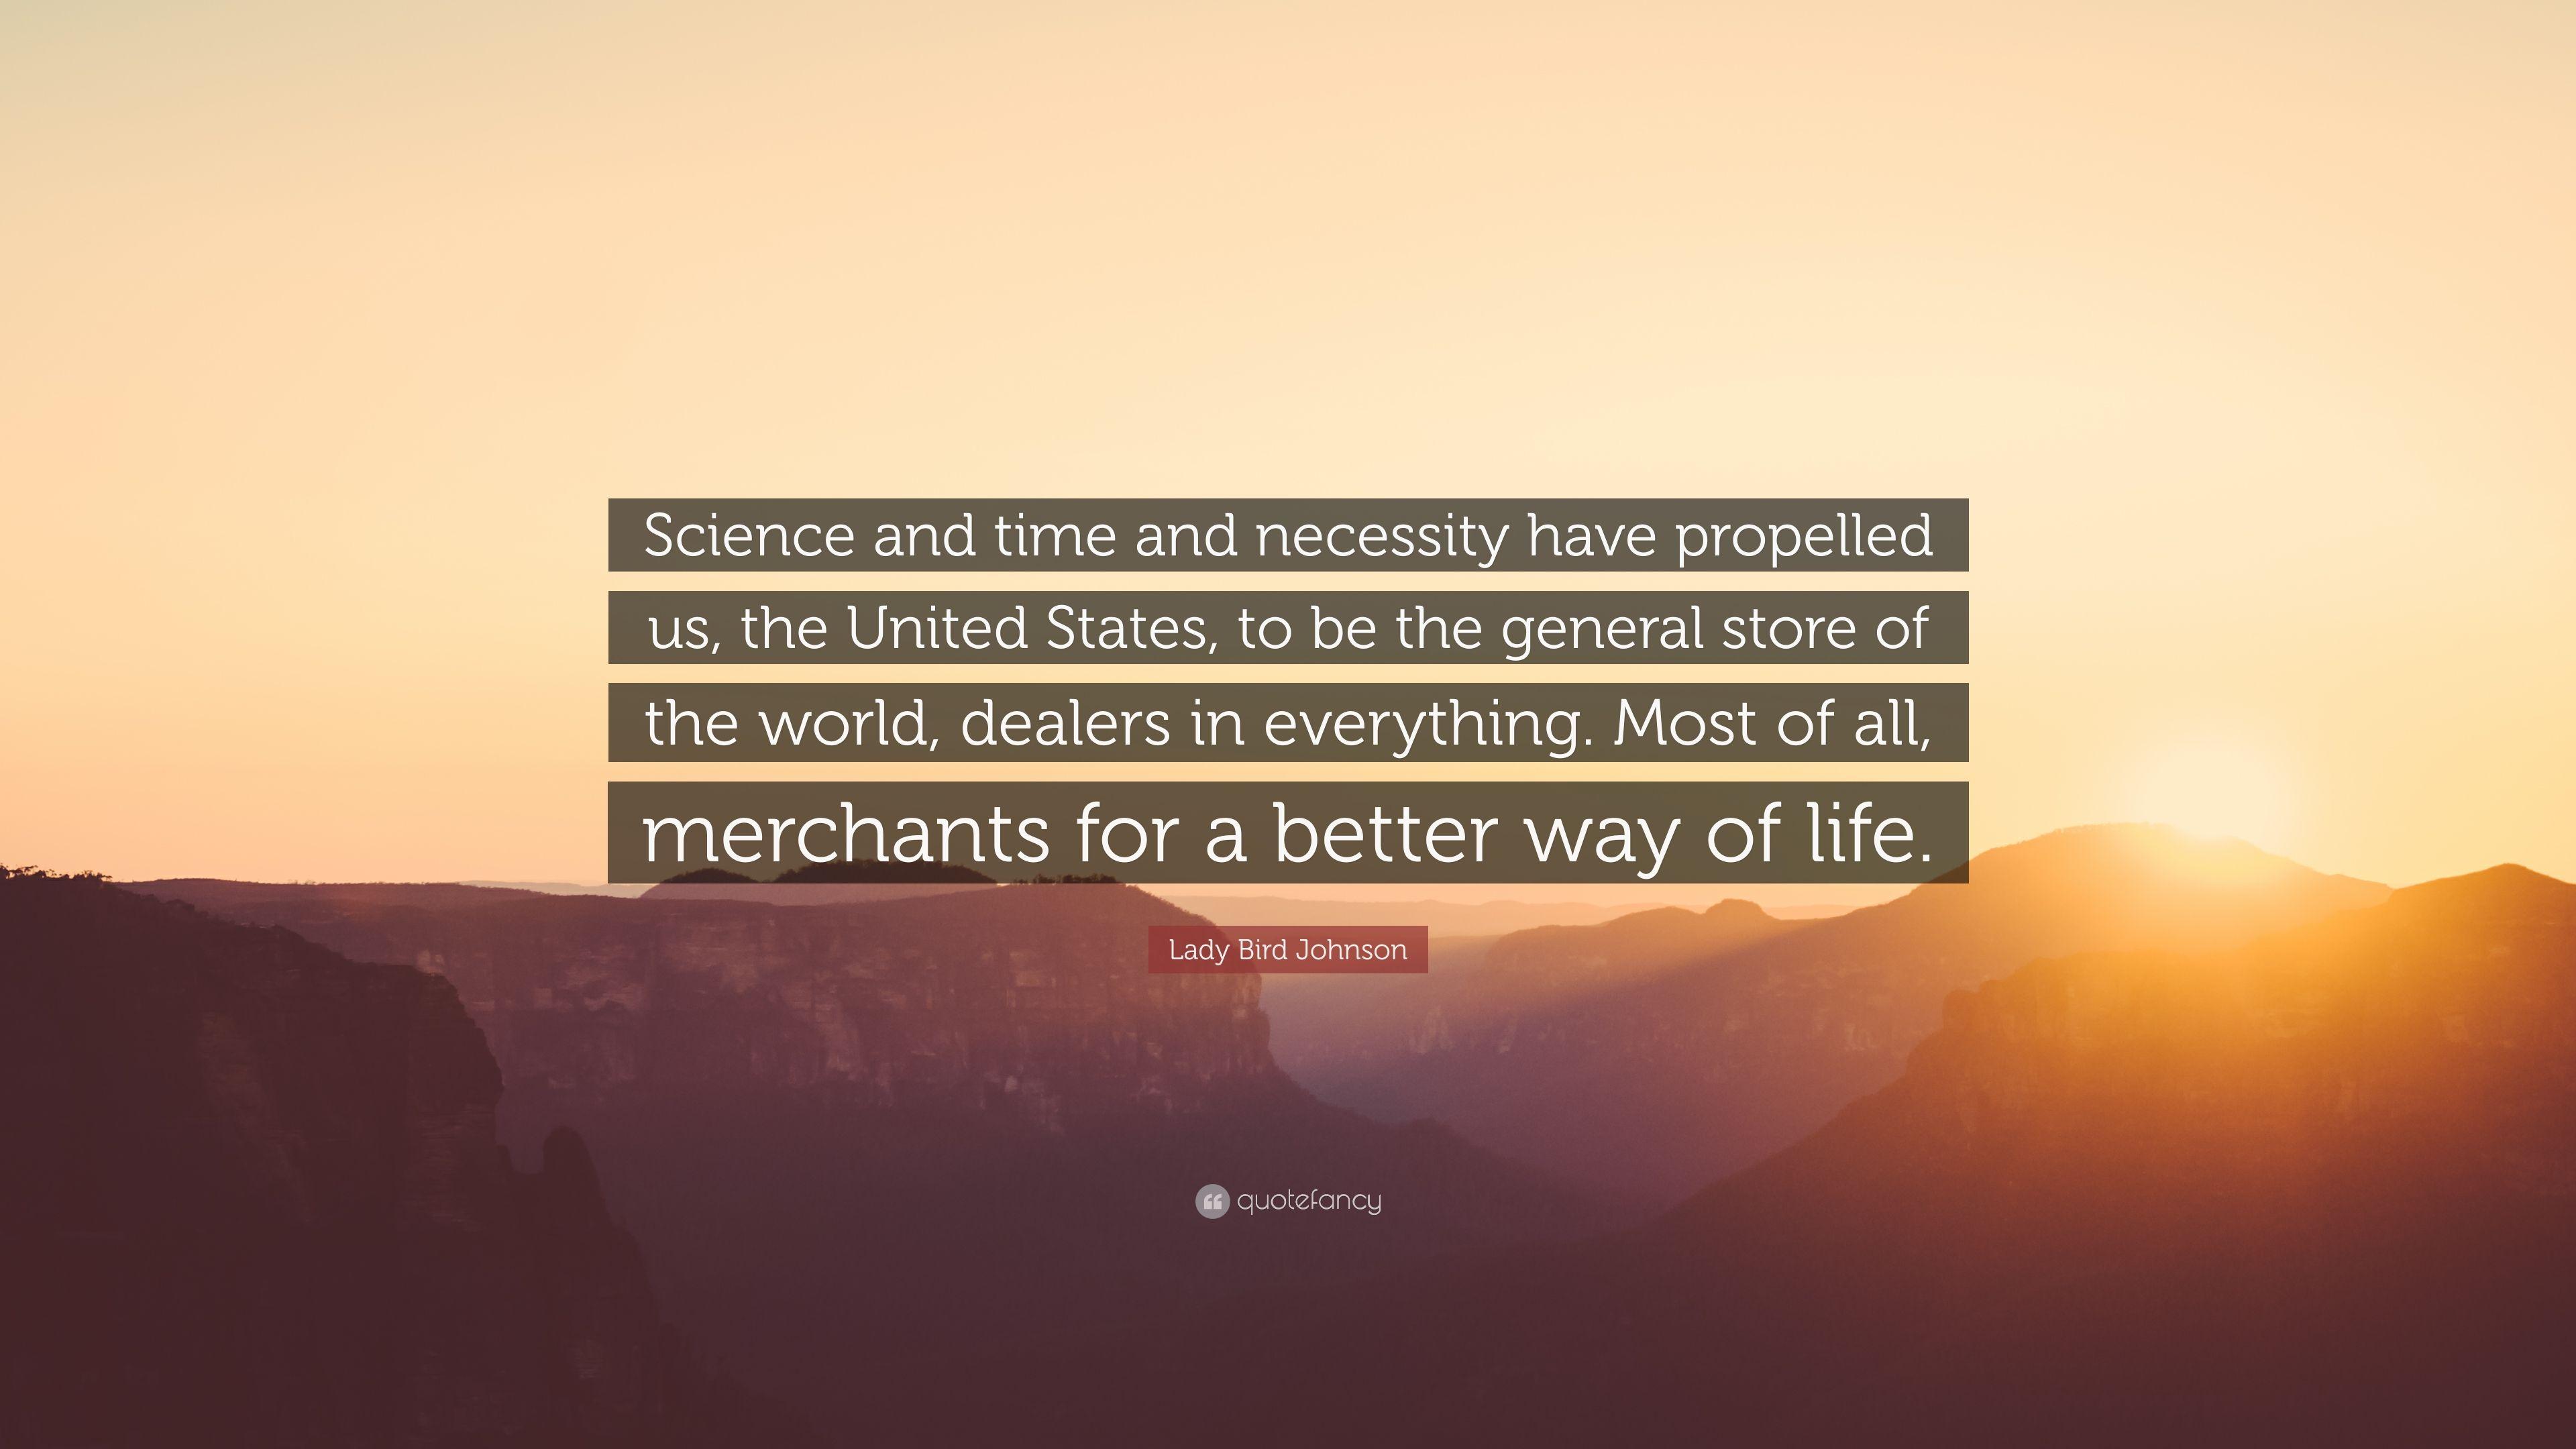 Lady Bird Johnson Quote: “Science and time and necessity